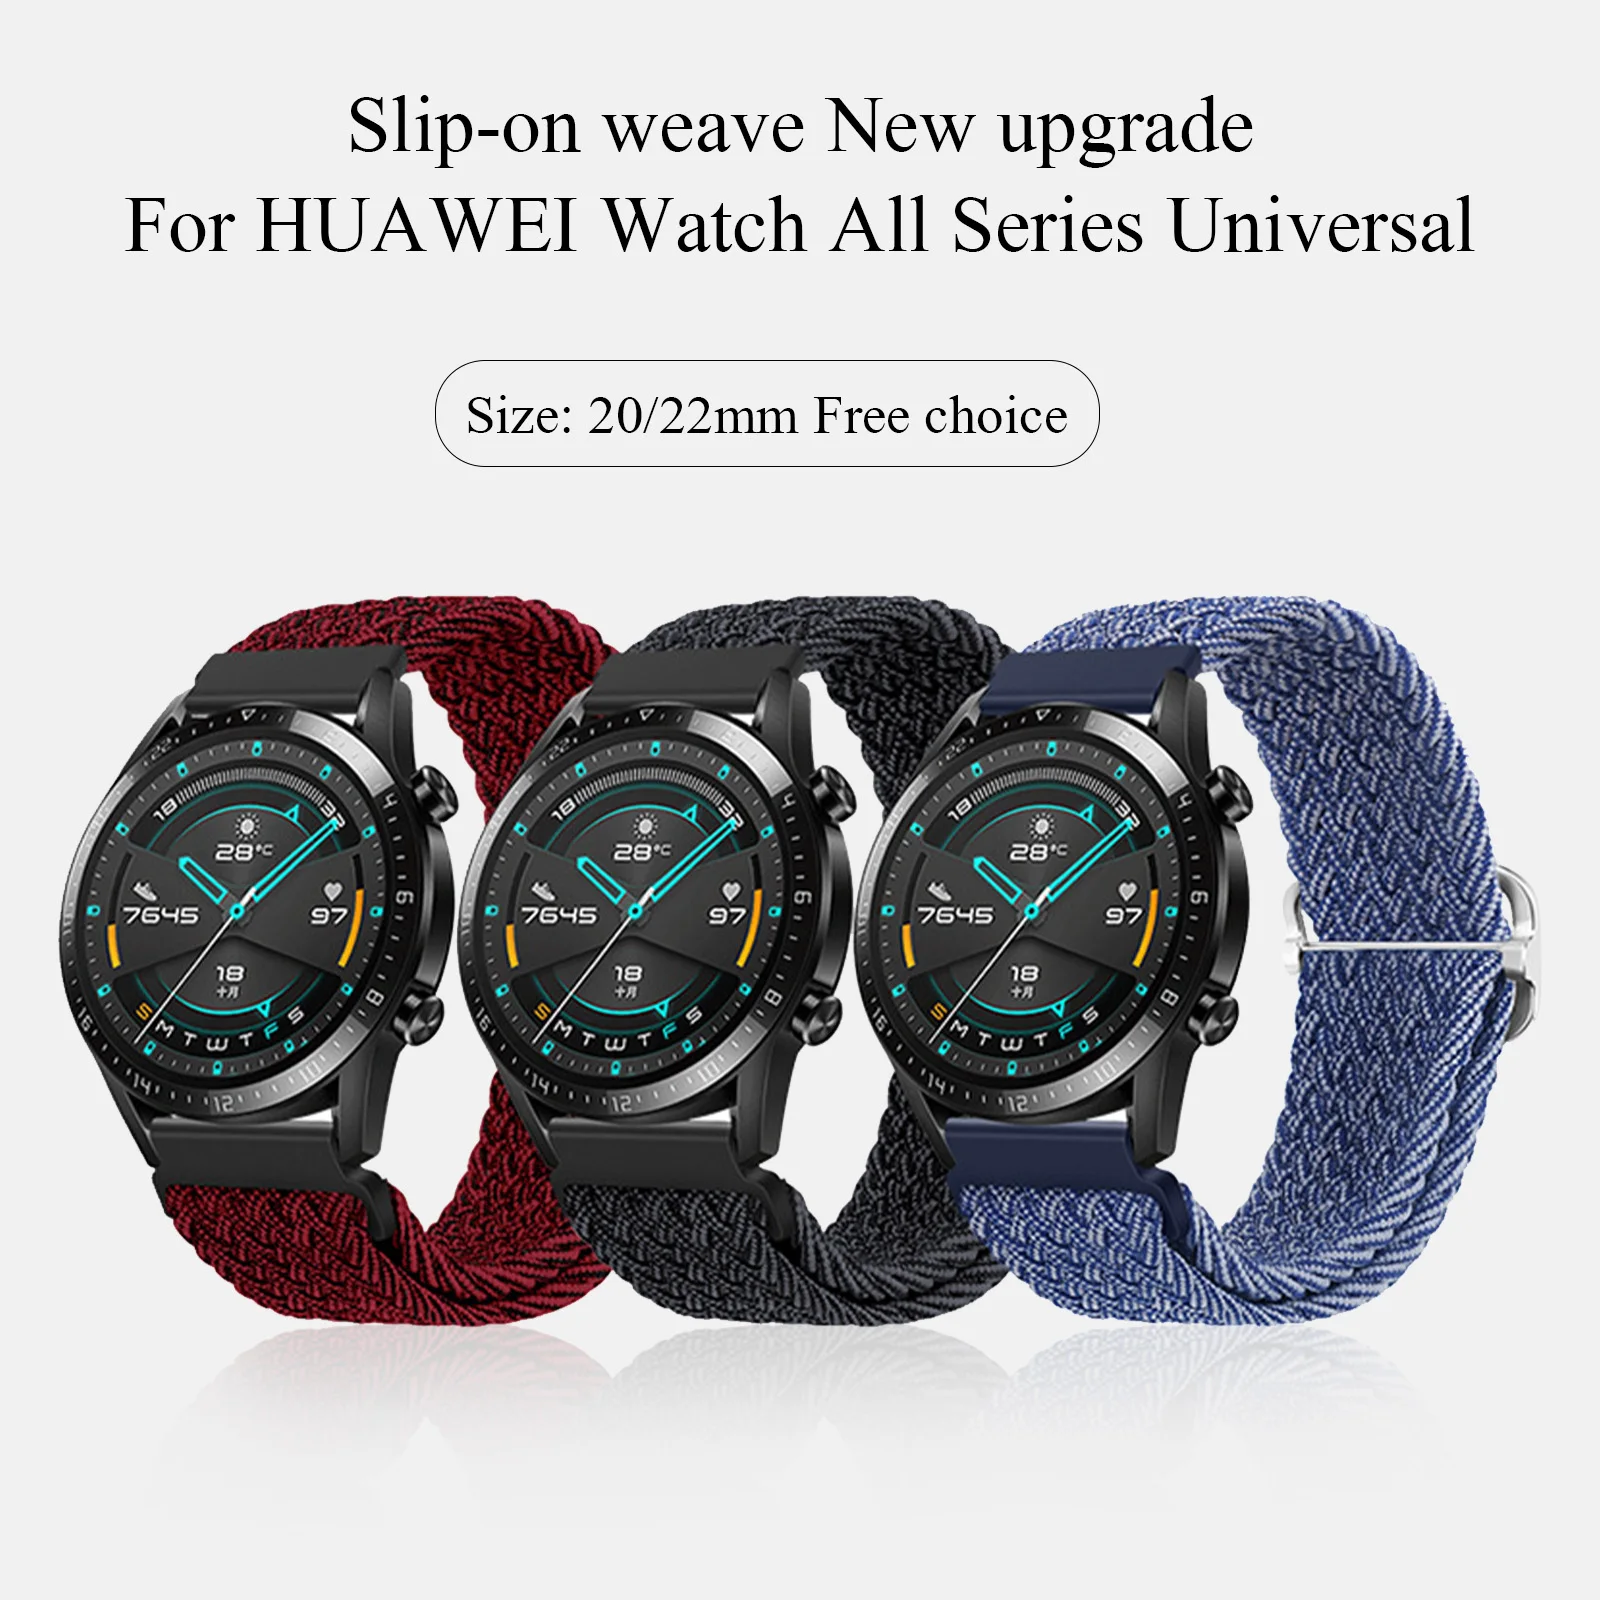 20mm 22mm Strap for Huawei Watch Ultimate GT 3 Pro Buds Series Adjustable Slide Buckle Nylon Weave Strap Replacement Watchband